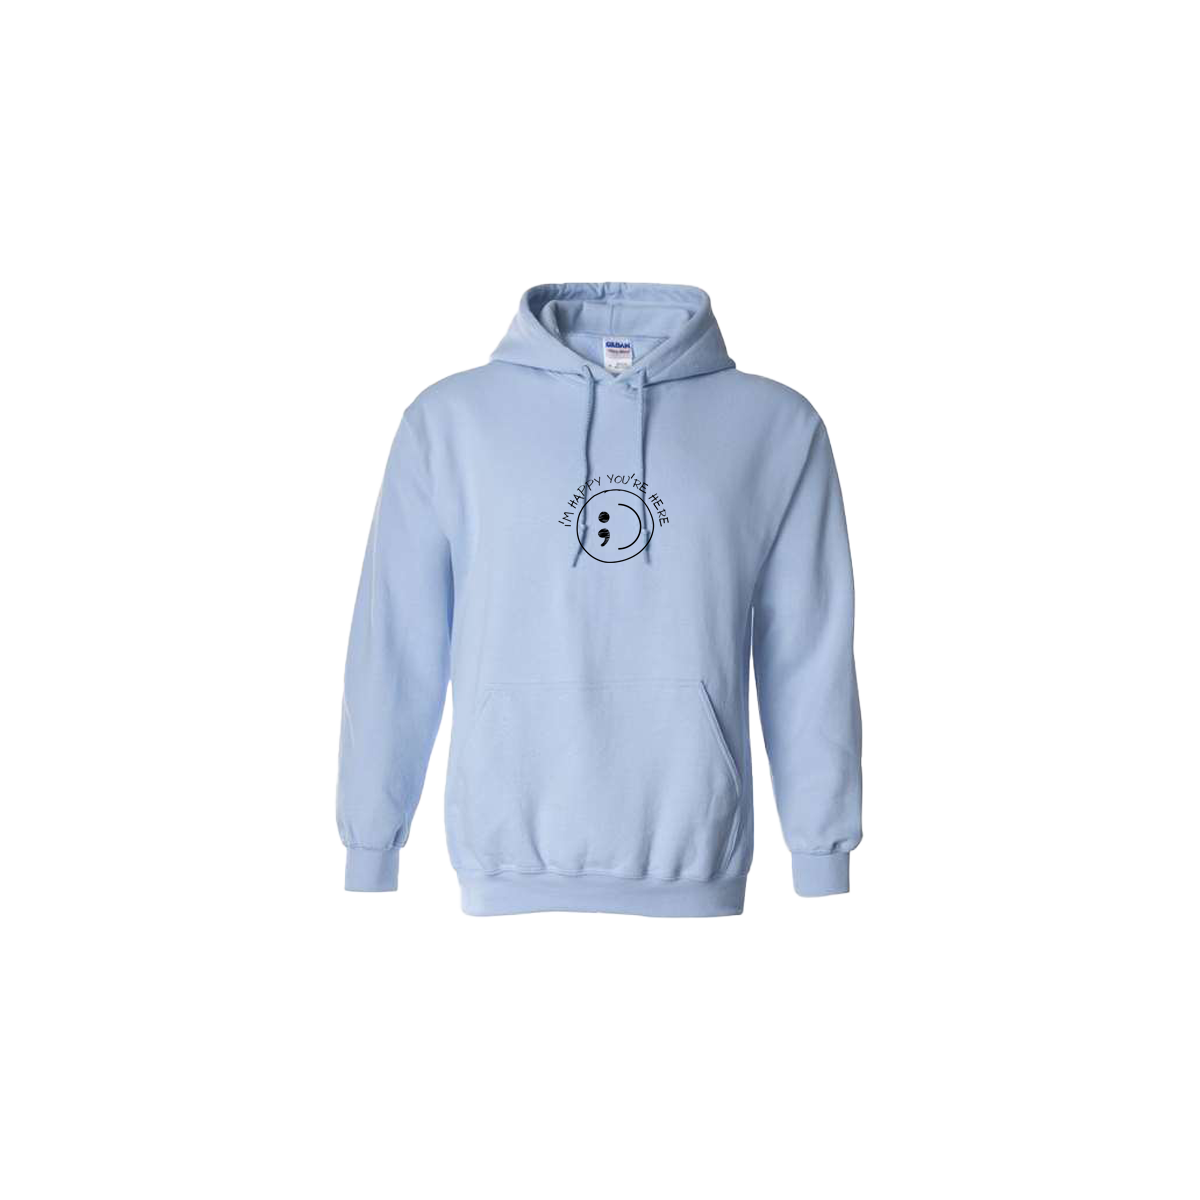 I'm Happy You're Here Embroidered Light Blue Hoodie - Mental Health Awareness Clothing